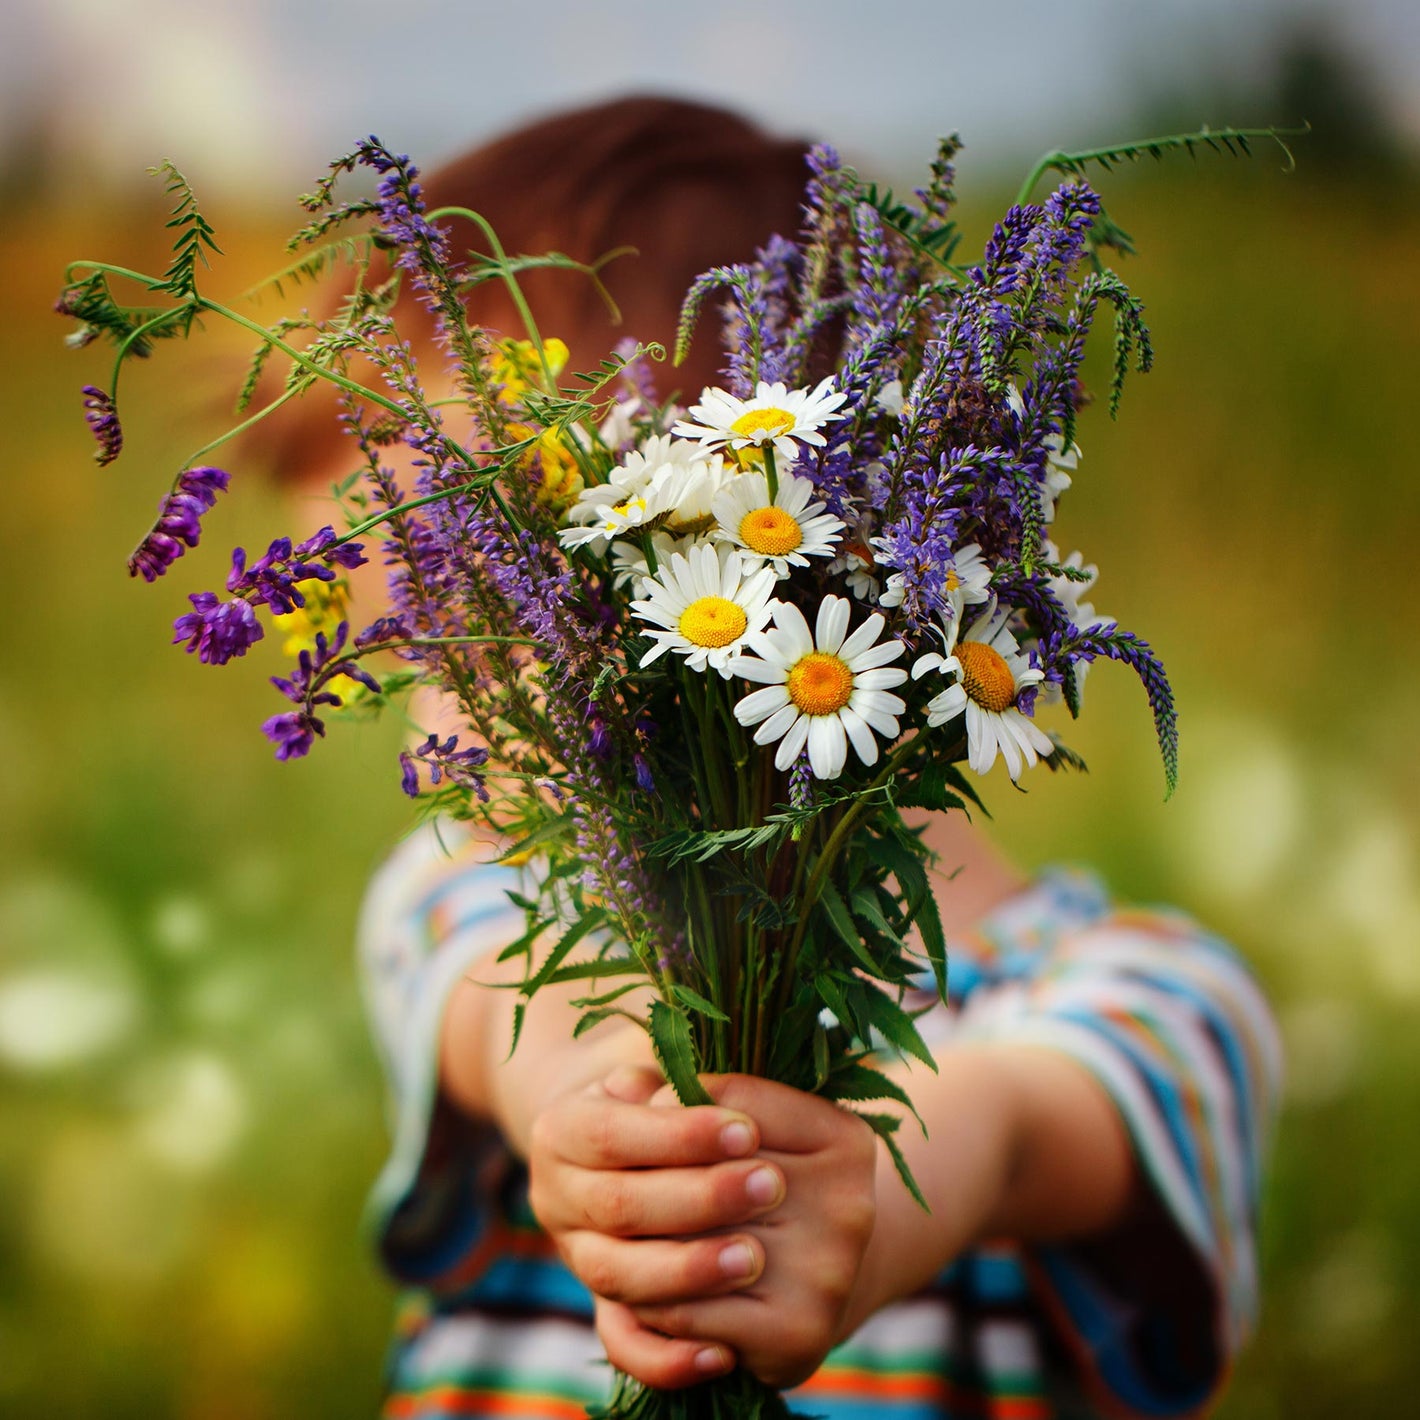 a little boy holding a bouquet of daises and lavender out in front of his face